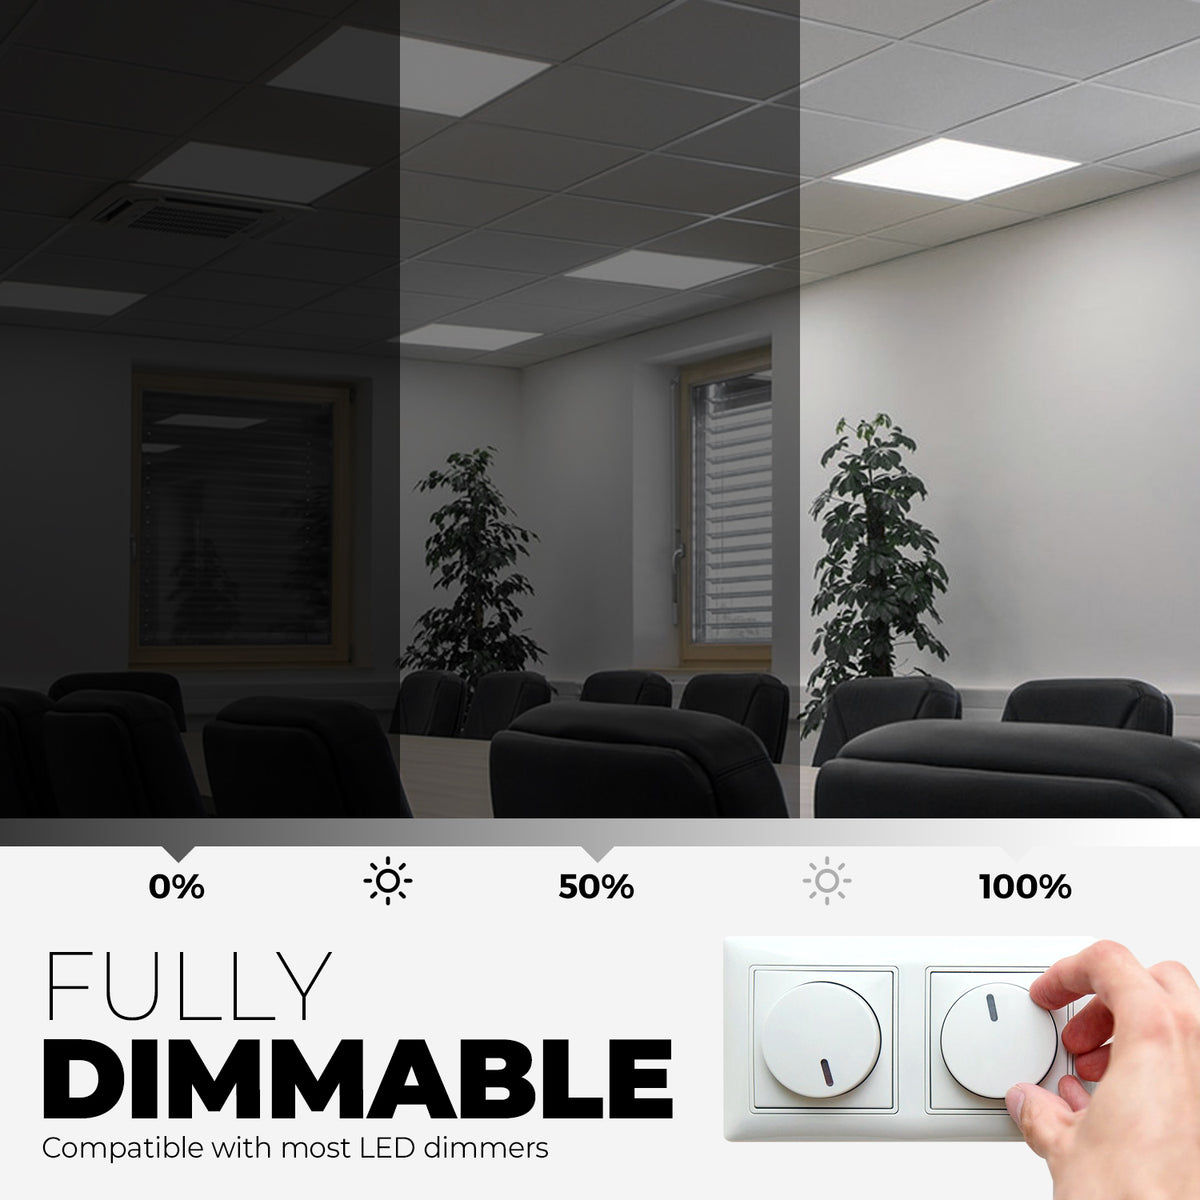 2x2 FT LED Panel Light, 30W/35W/40W, SELECTABLE WATTAGE &amp; CCT, 3CCT, ETL, FC, CE Certified